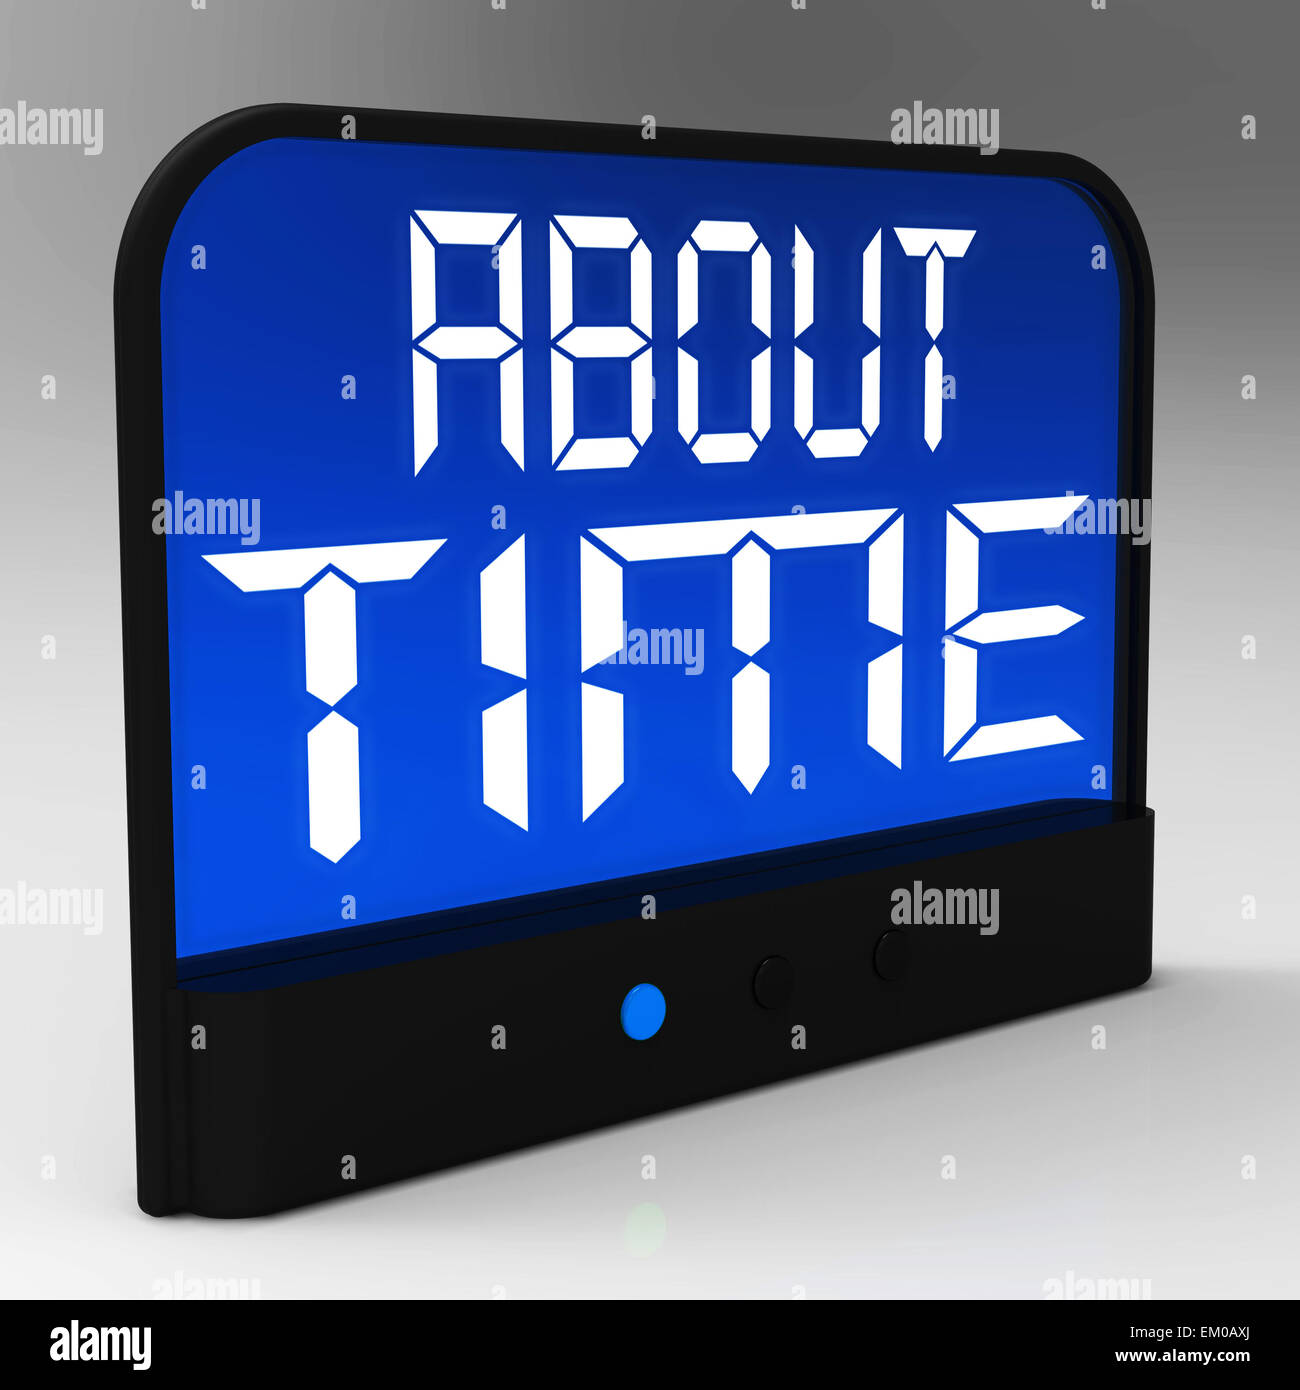 About Time Clock Showing Late And Tardiness Stock Photo